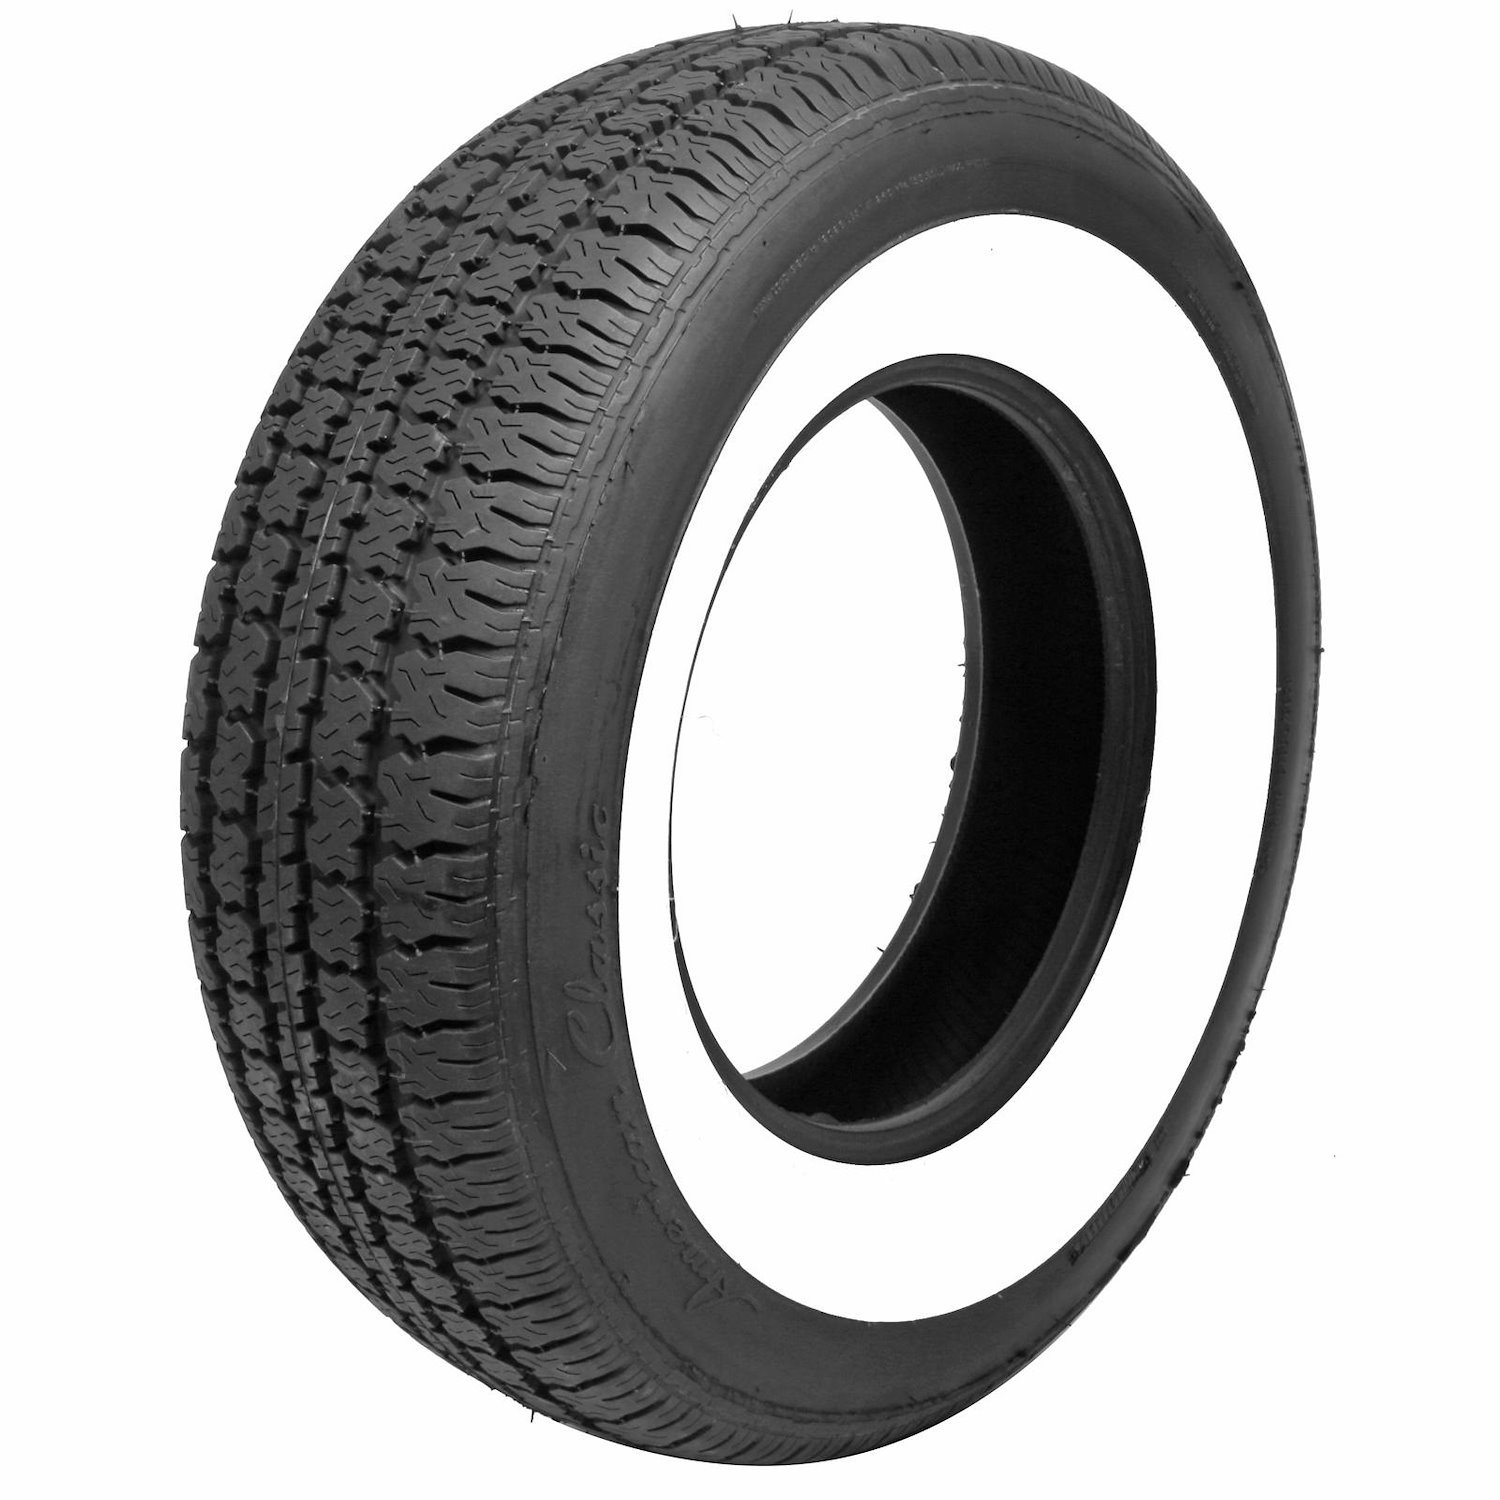 54701 Tire, American Classic Radial, 2.50-Inch Whitewall, 235/75R14